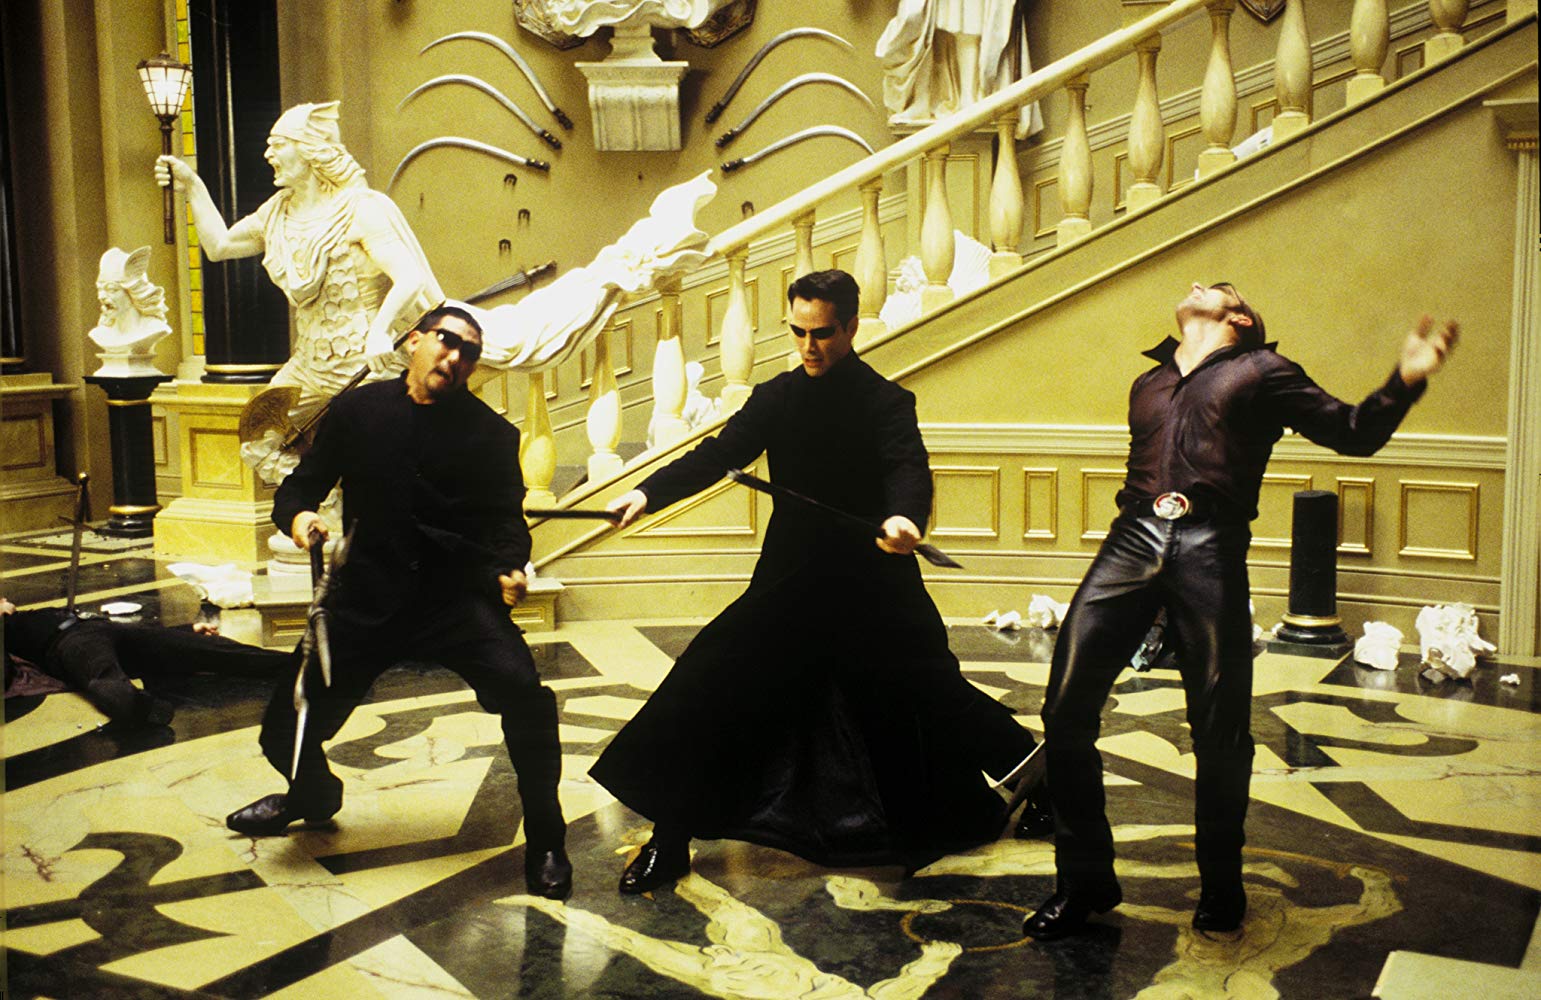 The Matrix Reloaded - Online Streaming Movies & TV-Shows ...